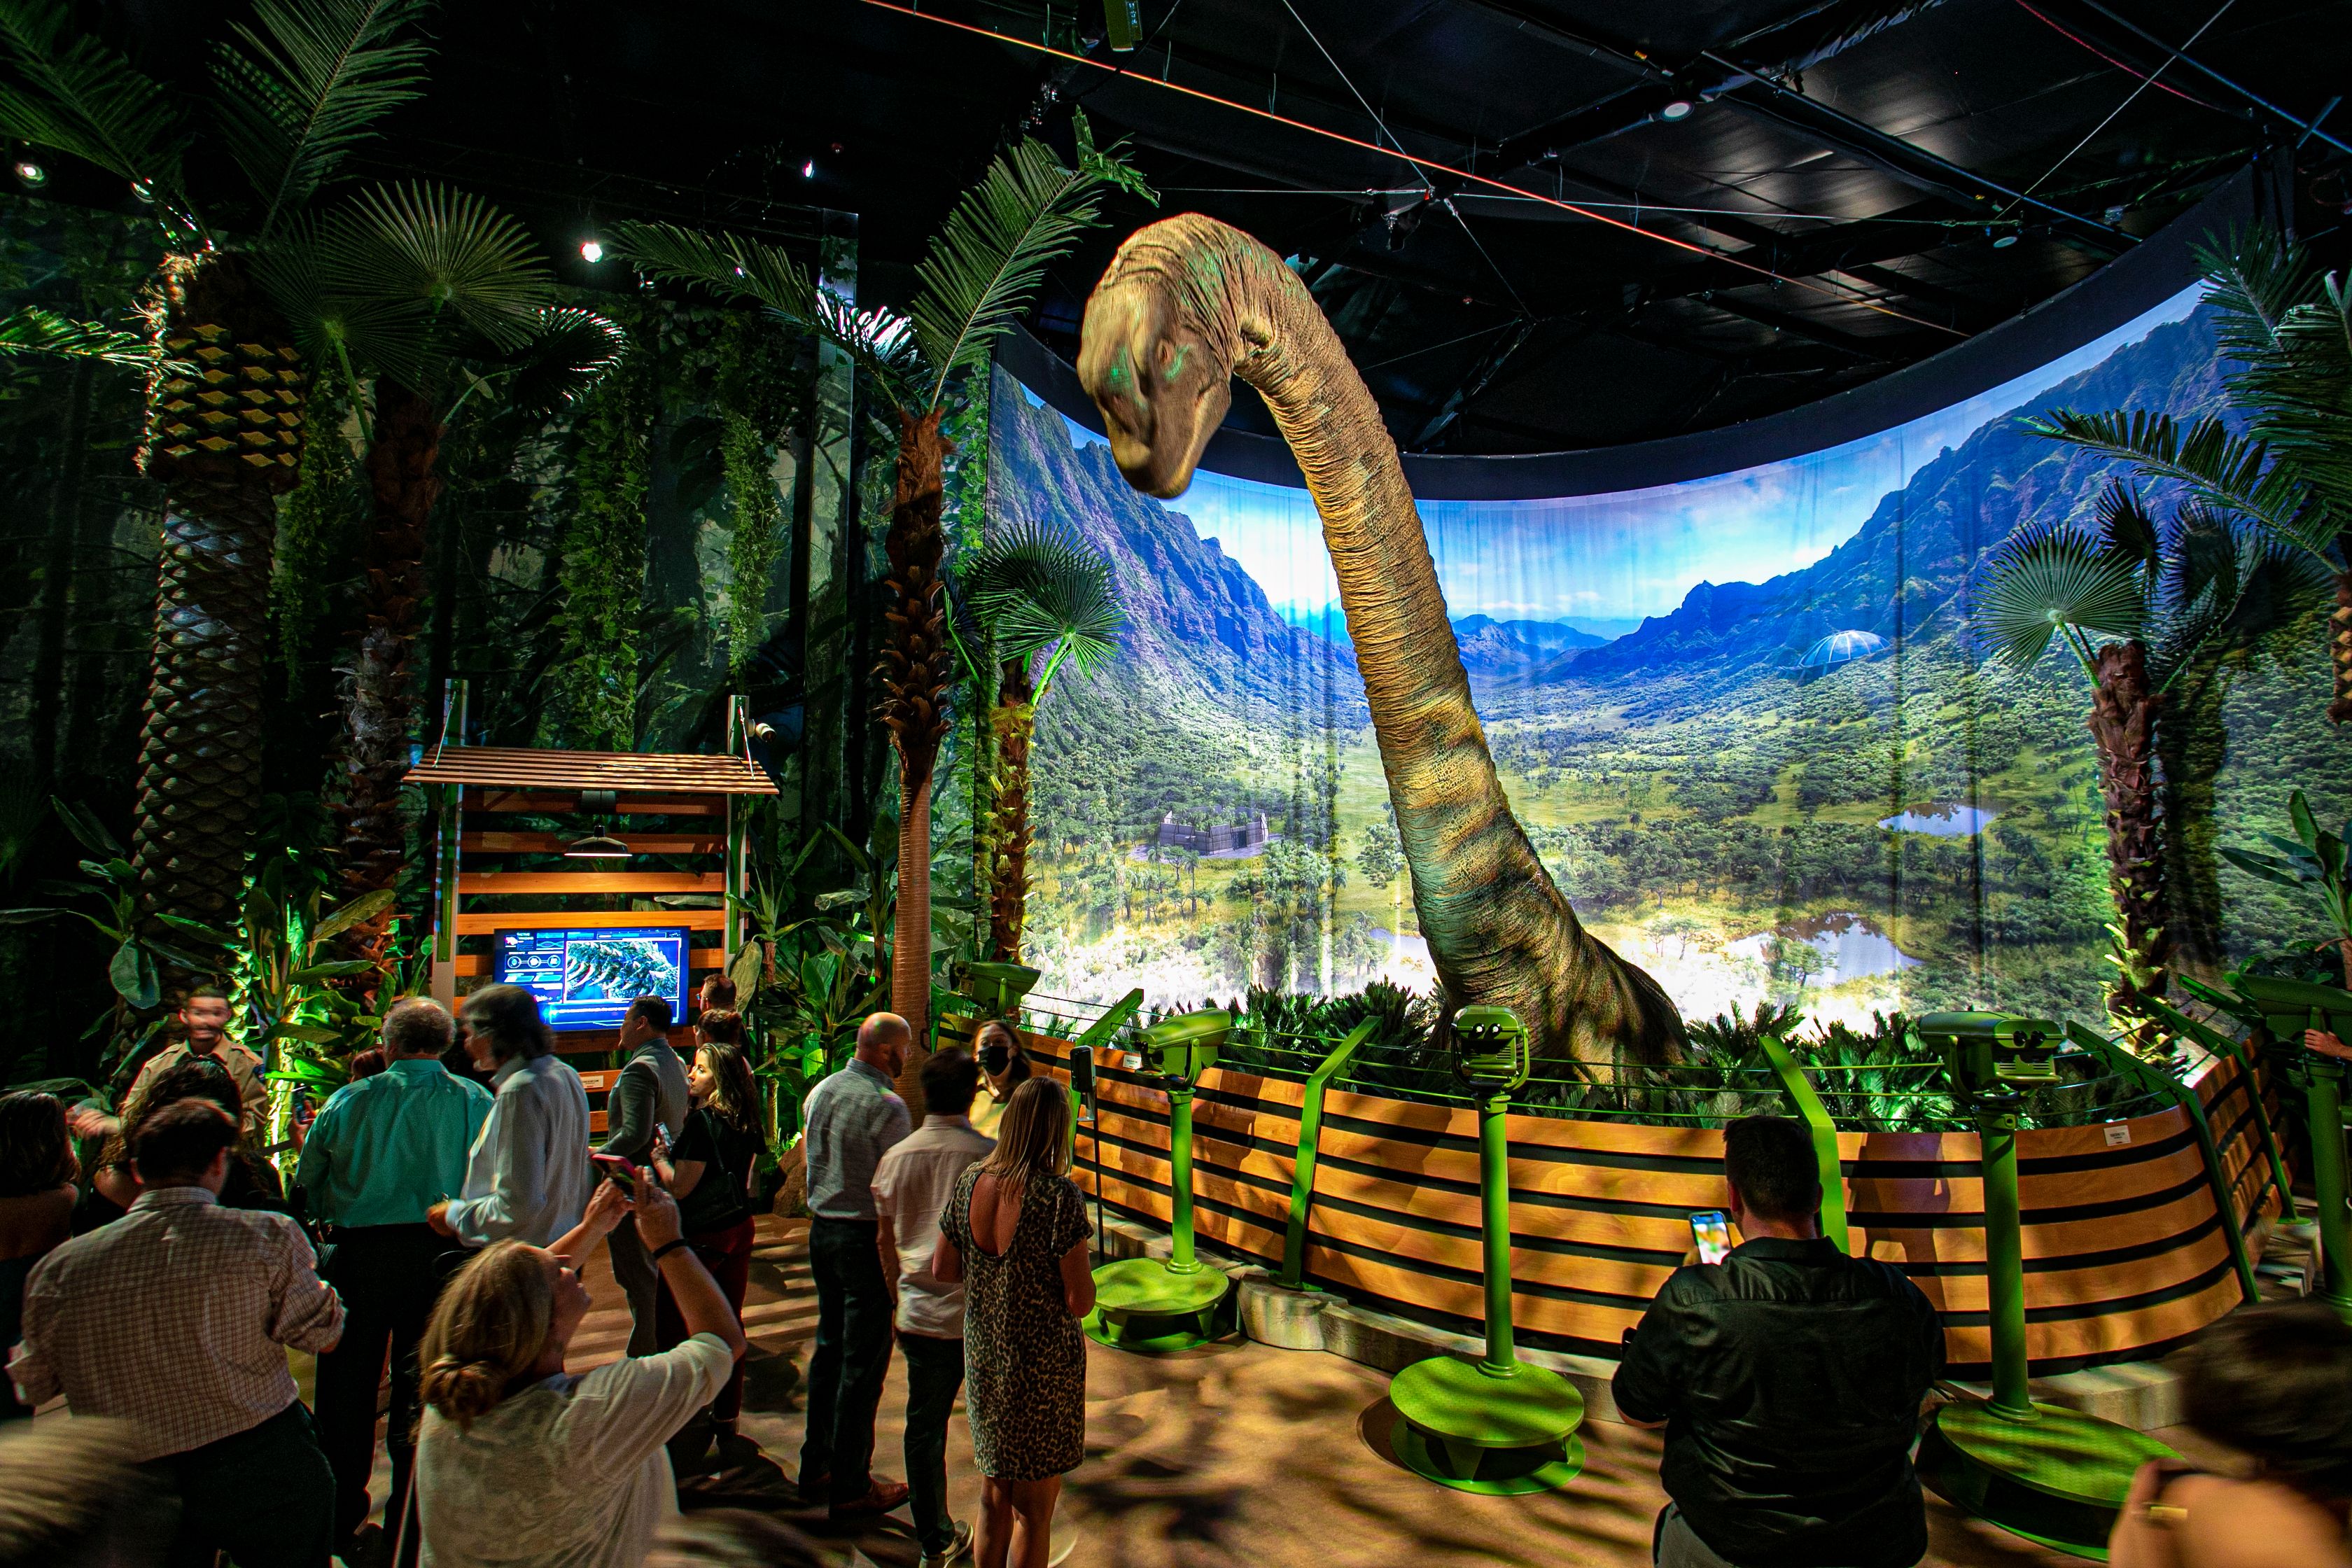 Jurassic World The Exhibition Images and Video Reveal 'Living' Dinosaurs